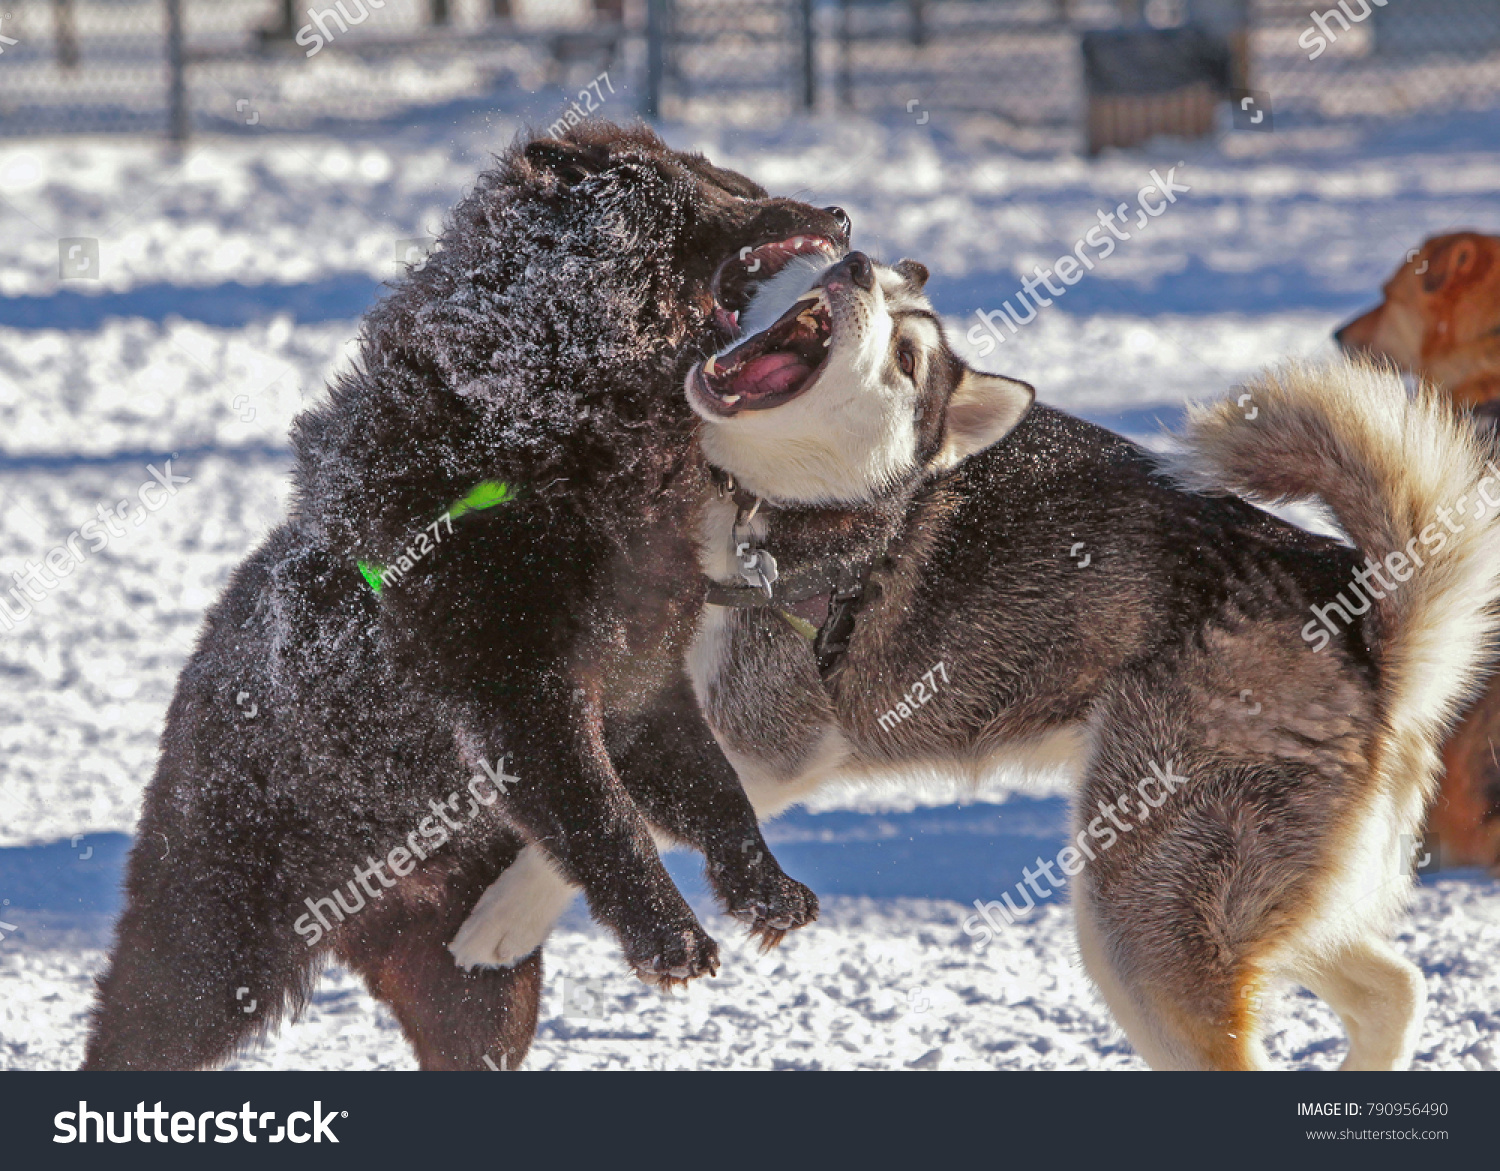 chow chow fighting